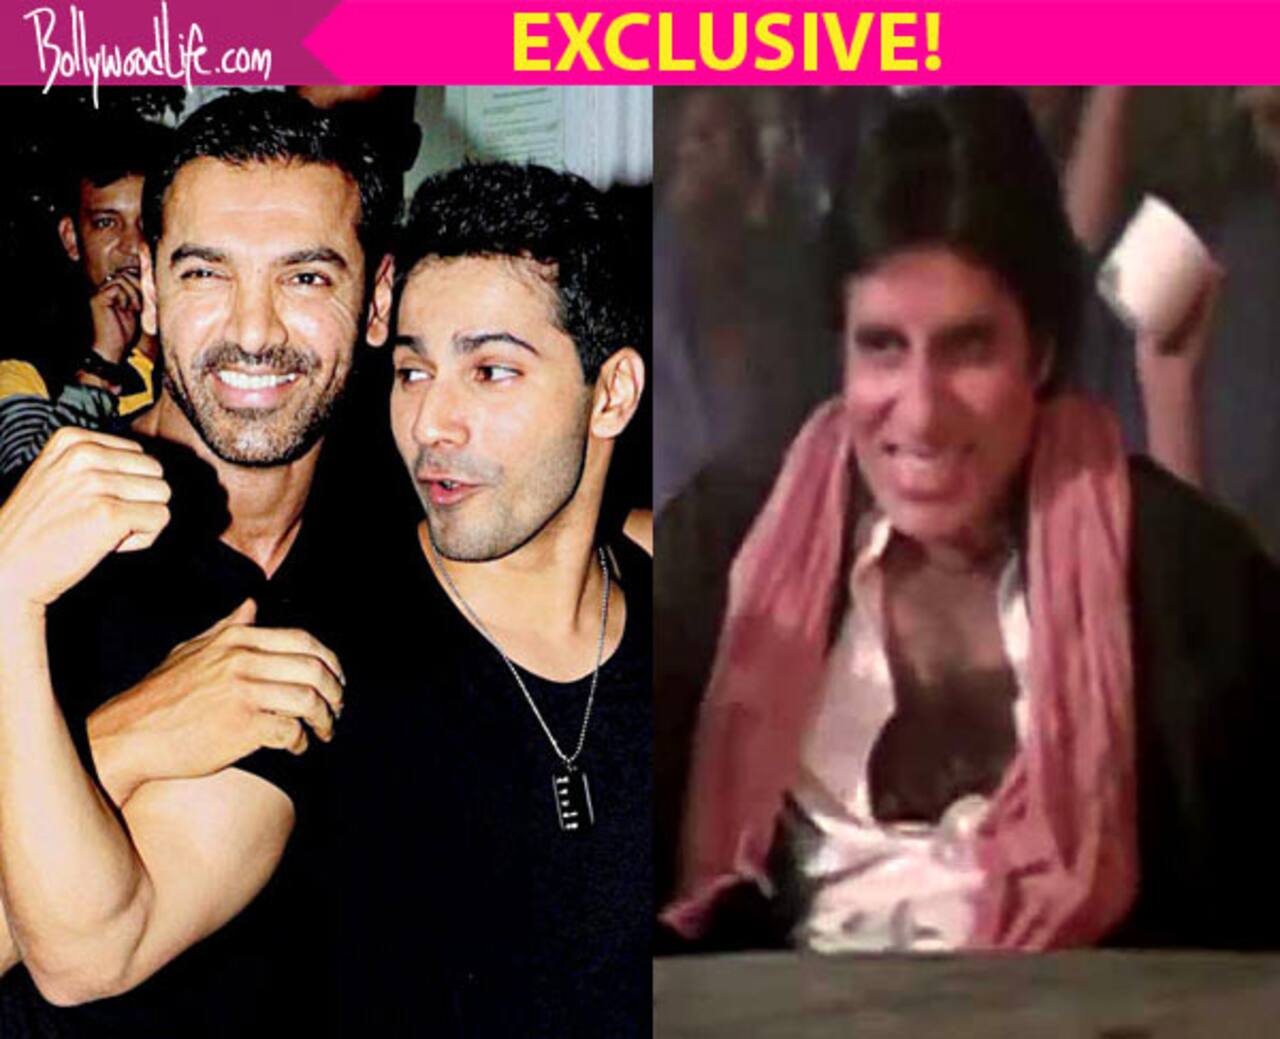 Varun Dhawan and John Abraham's song in Dishoom will remind you of Amitabh Bachchan’s super hit song Jumma Chumma- Read on the exclusive details!